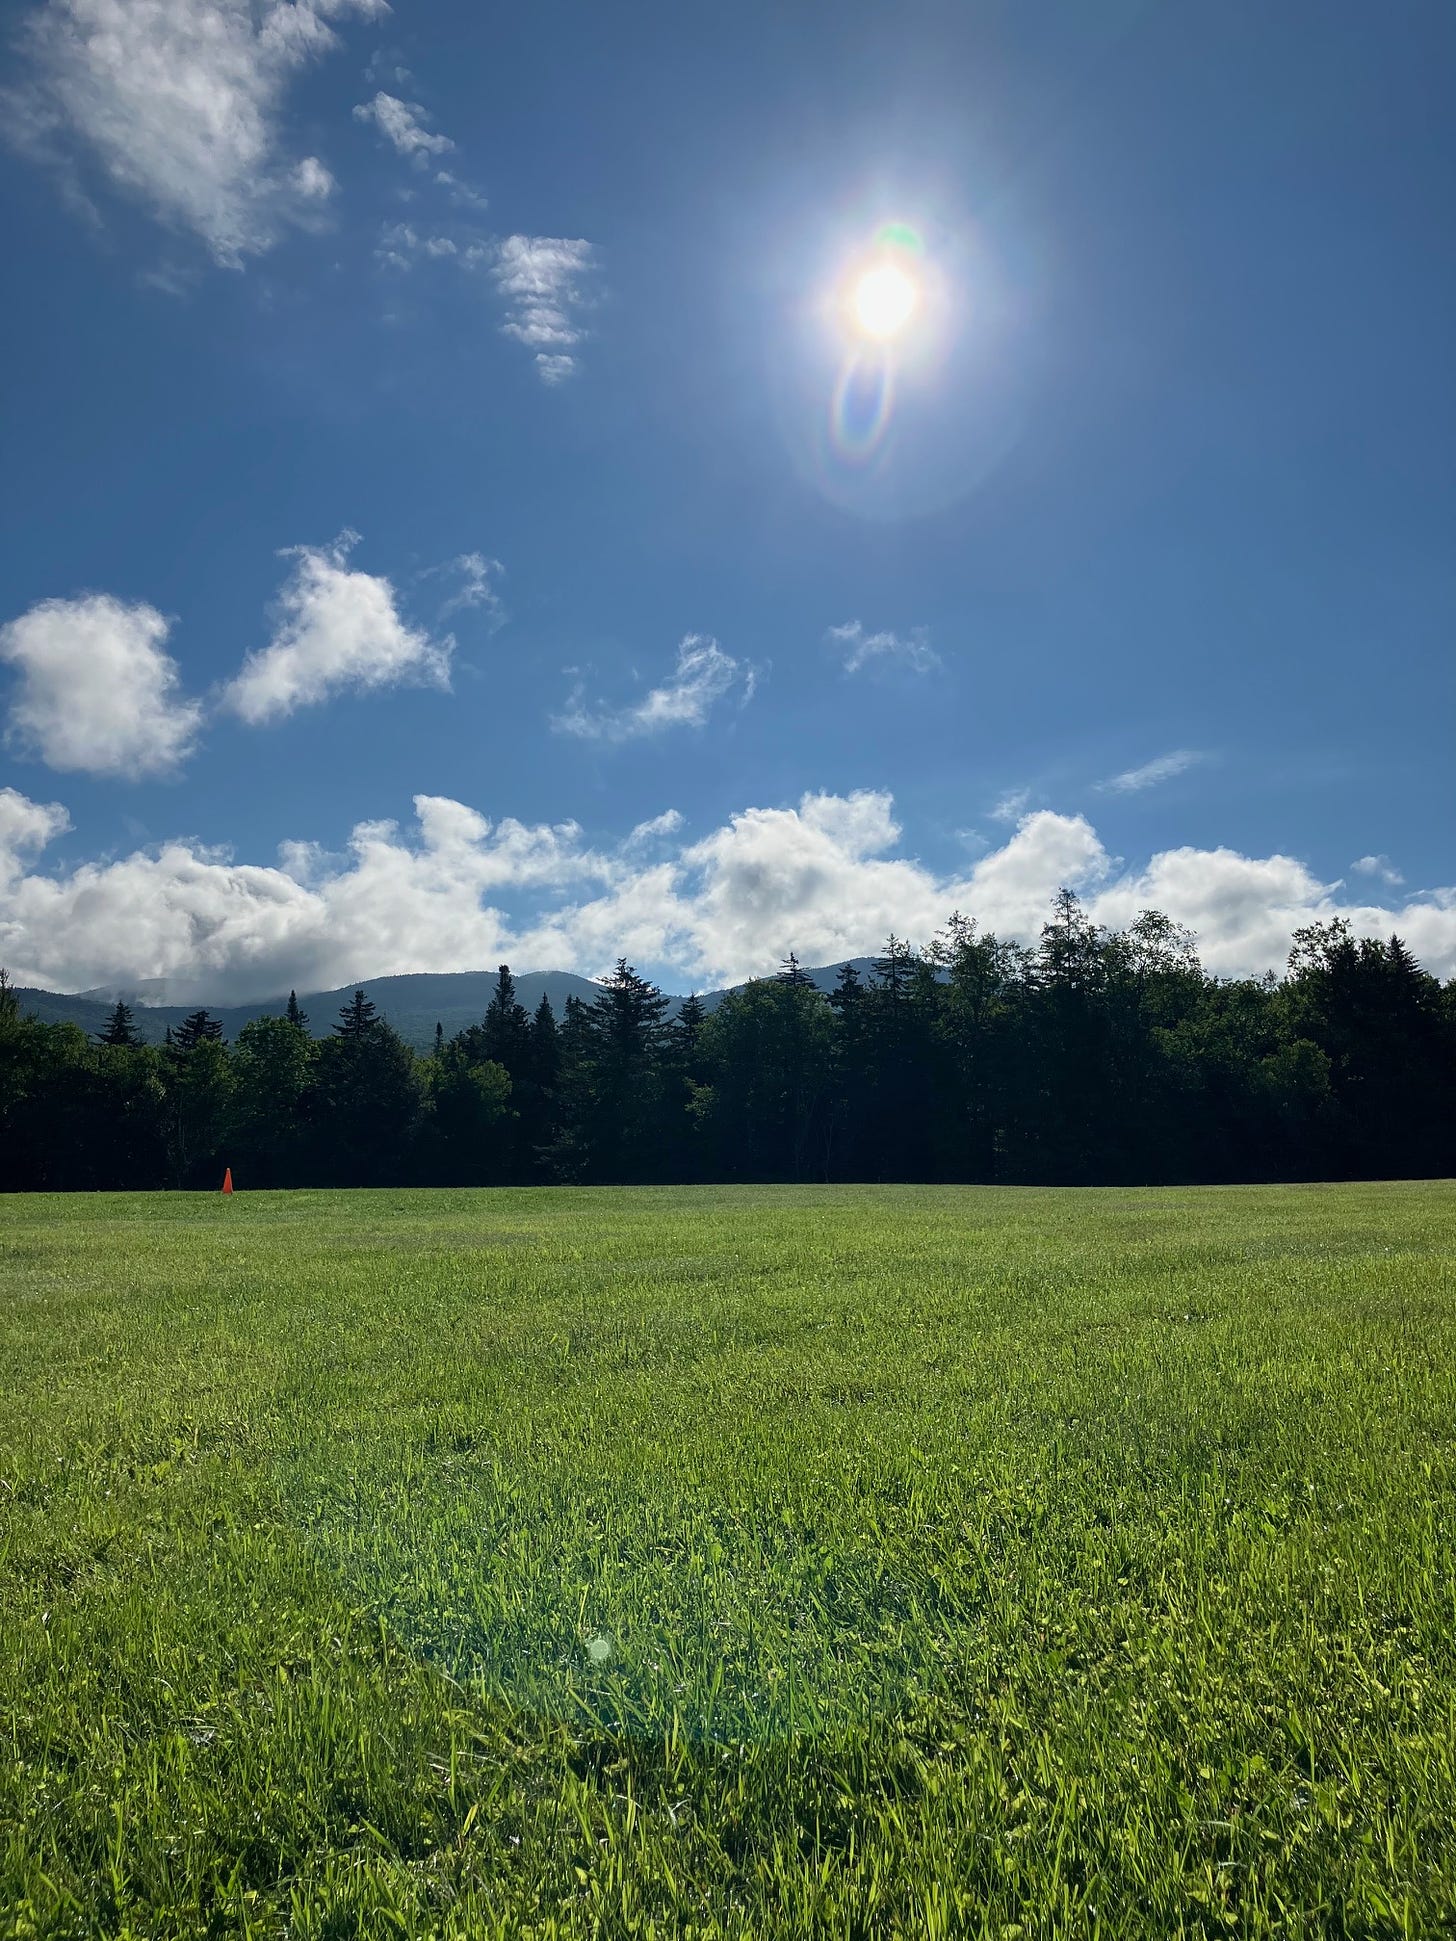 A meadow with woods and mountains in the background, clouds in the blue sky and a bright sun